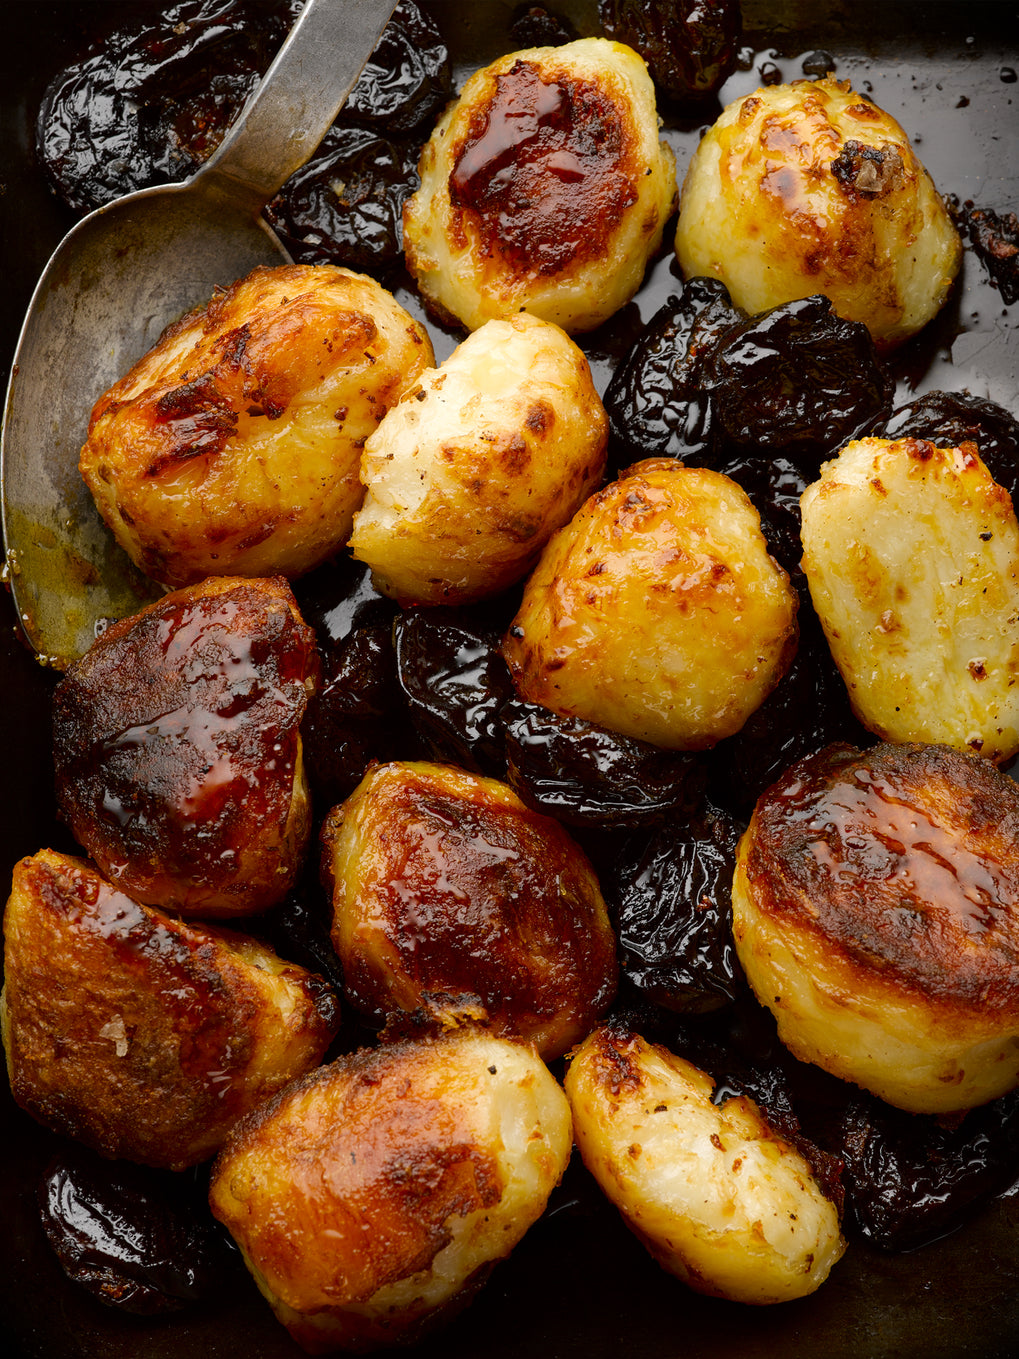 Roasted potatoes with caramel and Agen prunes